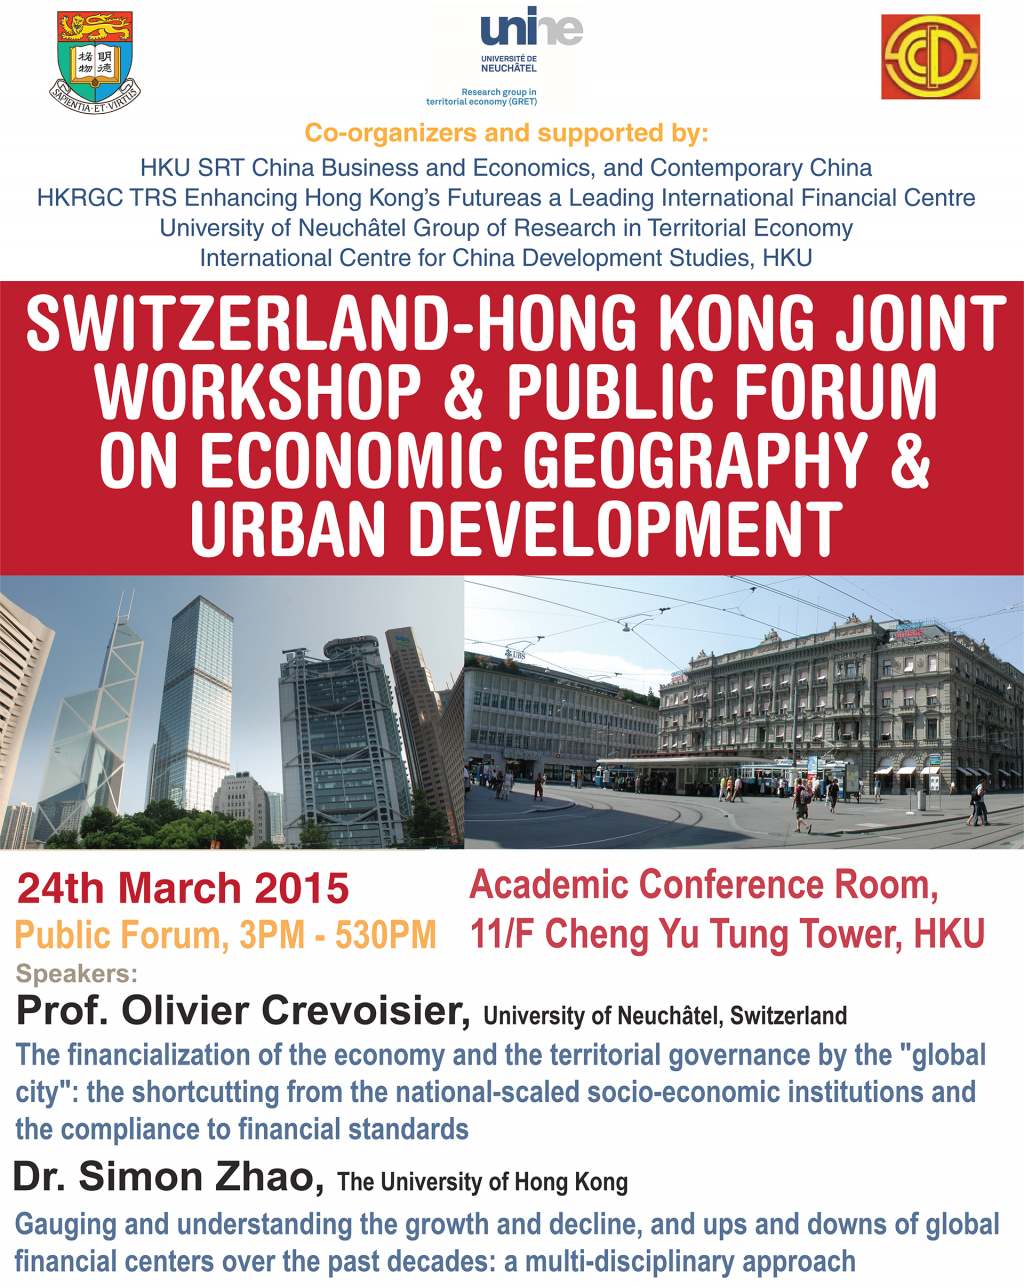 Switzerland-Hong Kong Joint Workshop and Public Forum on Economic Geography and Urban Development